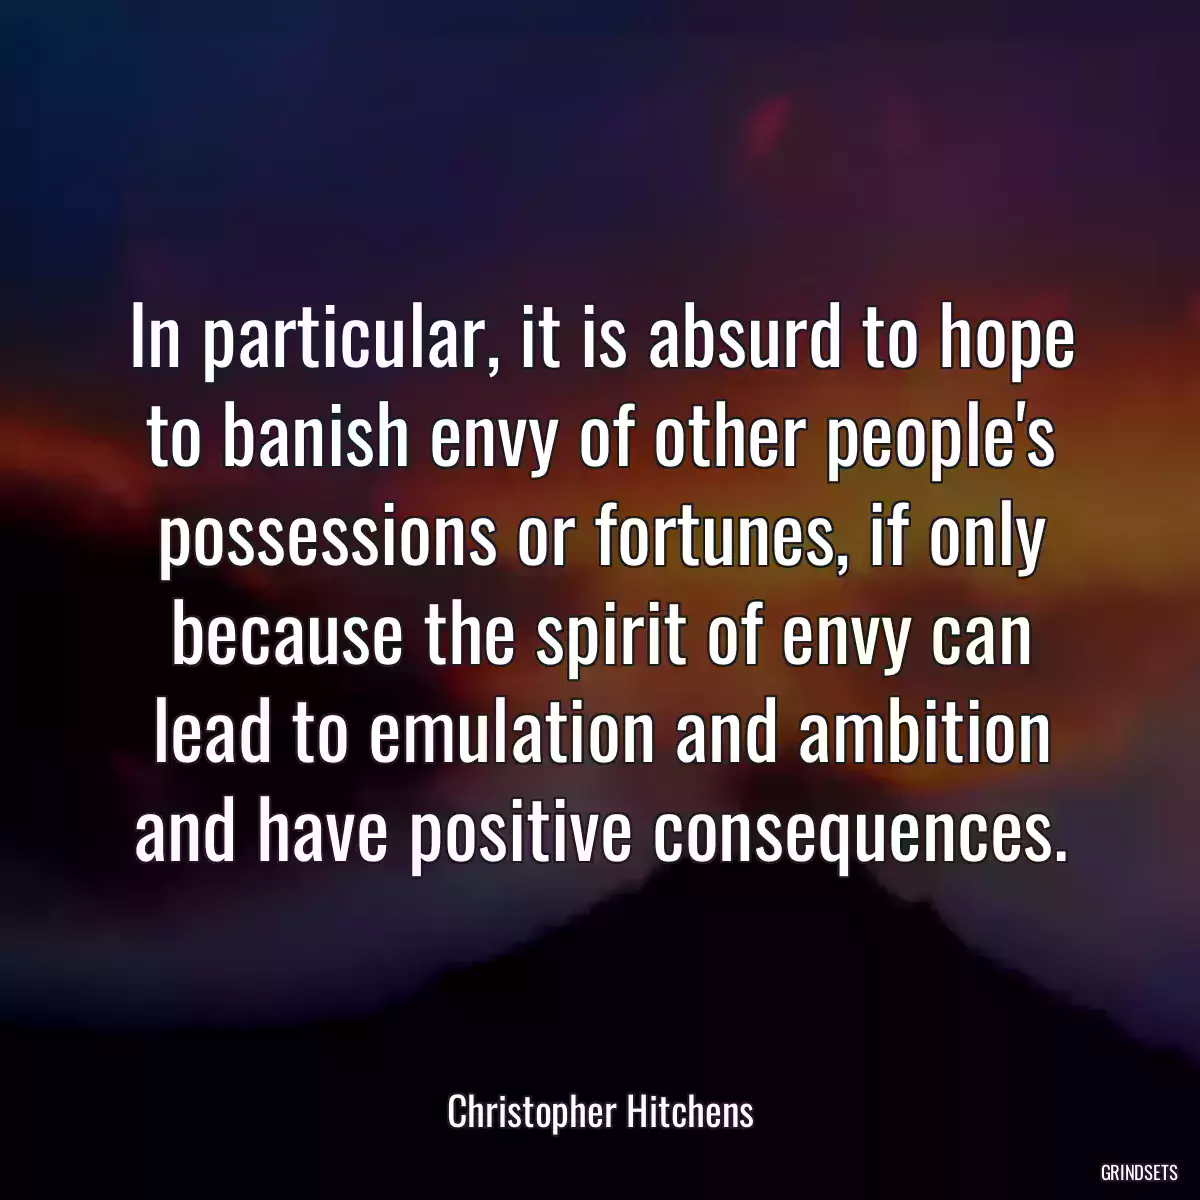 In particular, it is absurd to hope to banish envy of other people\'s possessions or fortunes, if only because the spirit of envy can lead to emulation and ambition and have positive consequences.